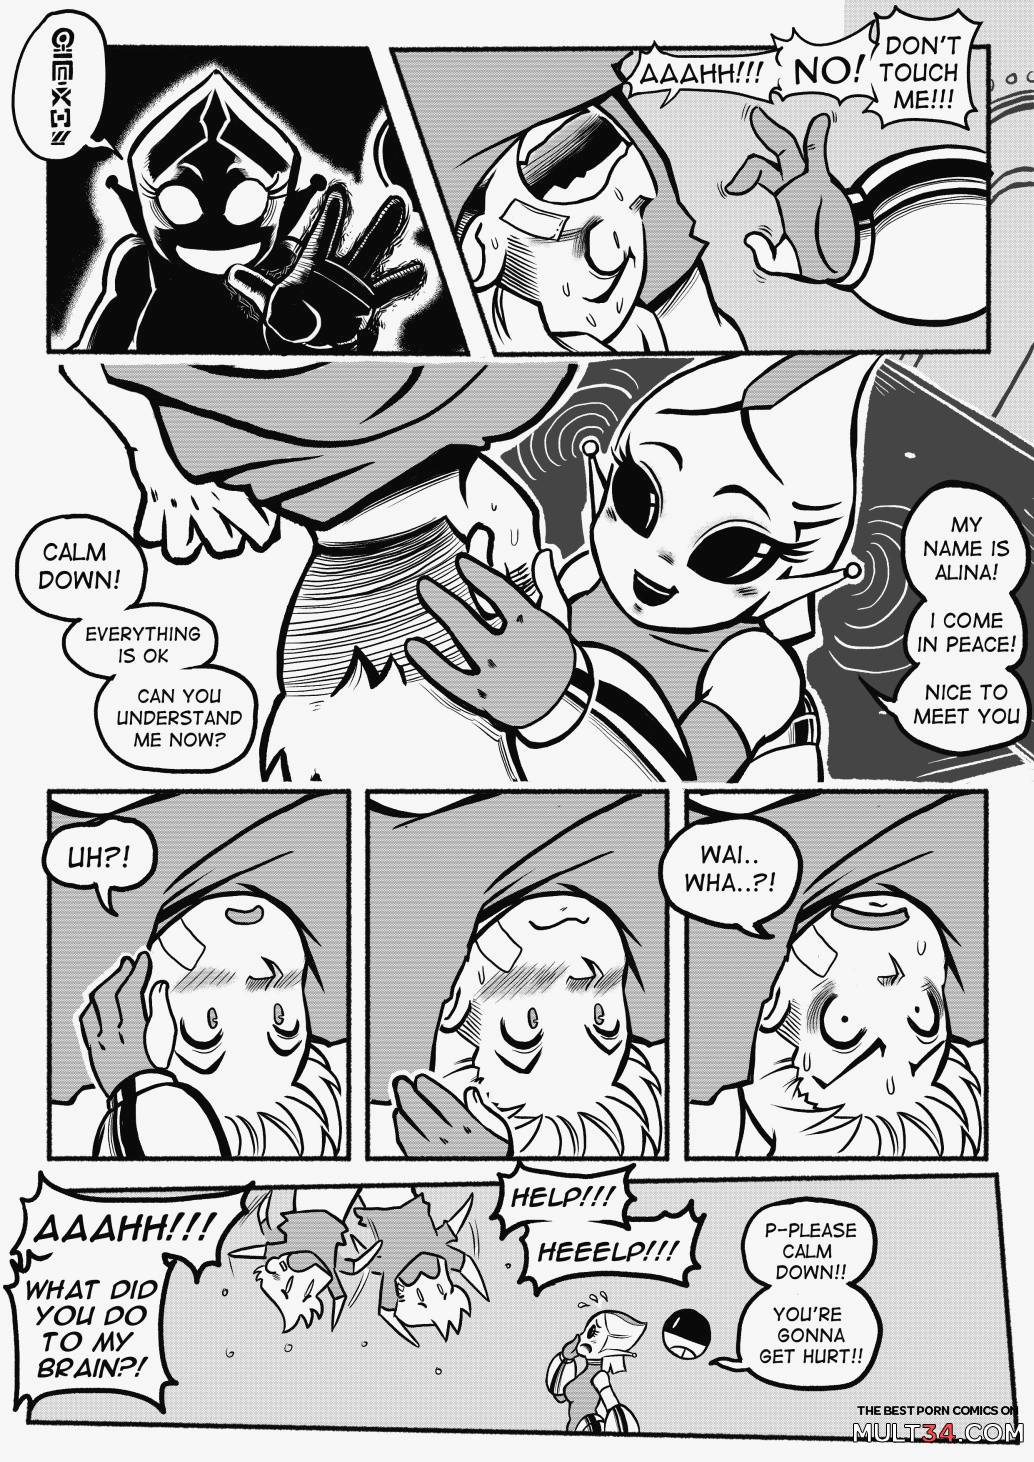 Abducted! - Mr.E page 6